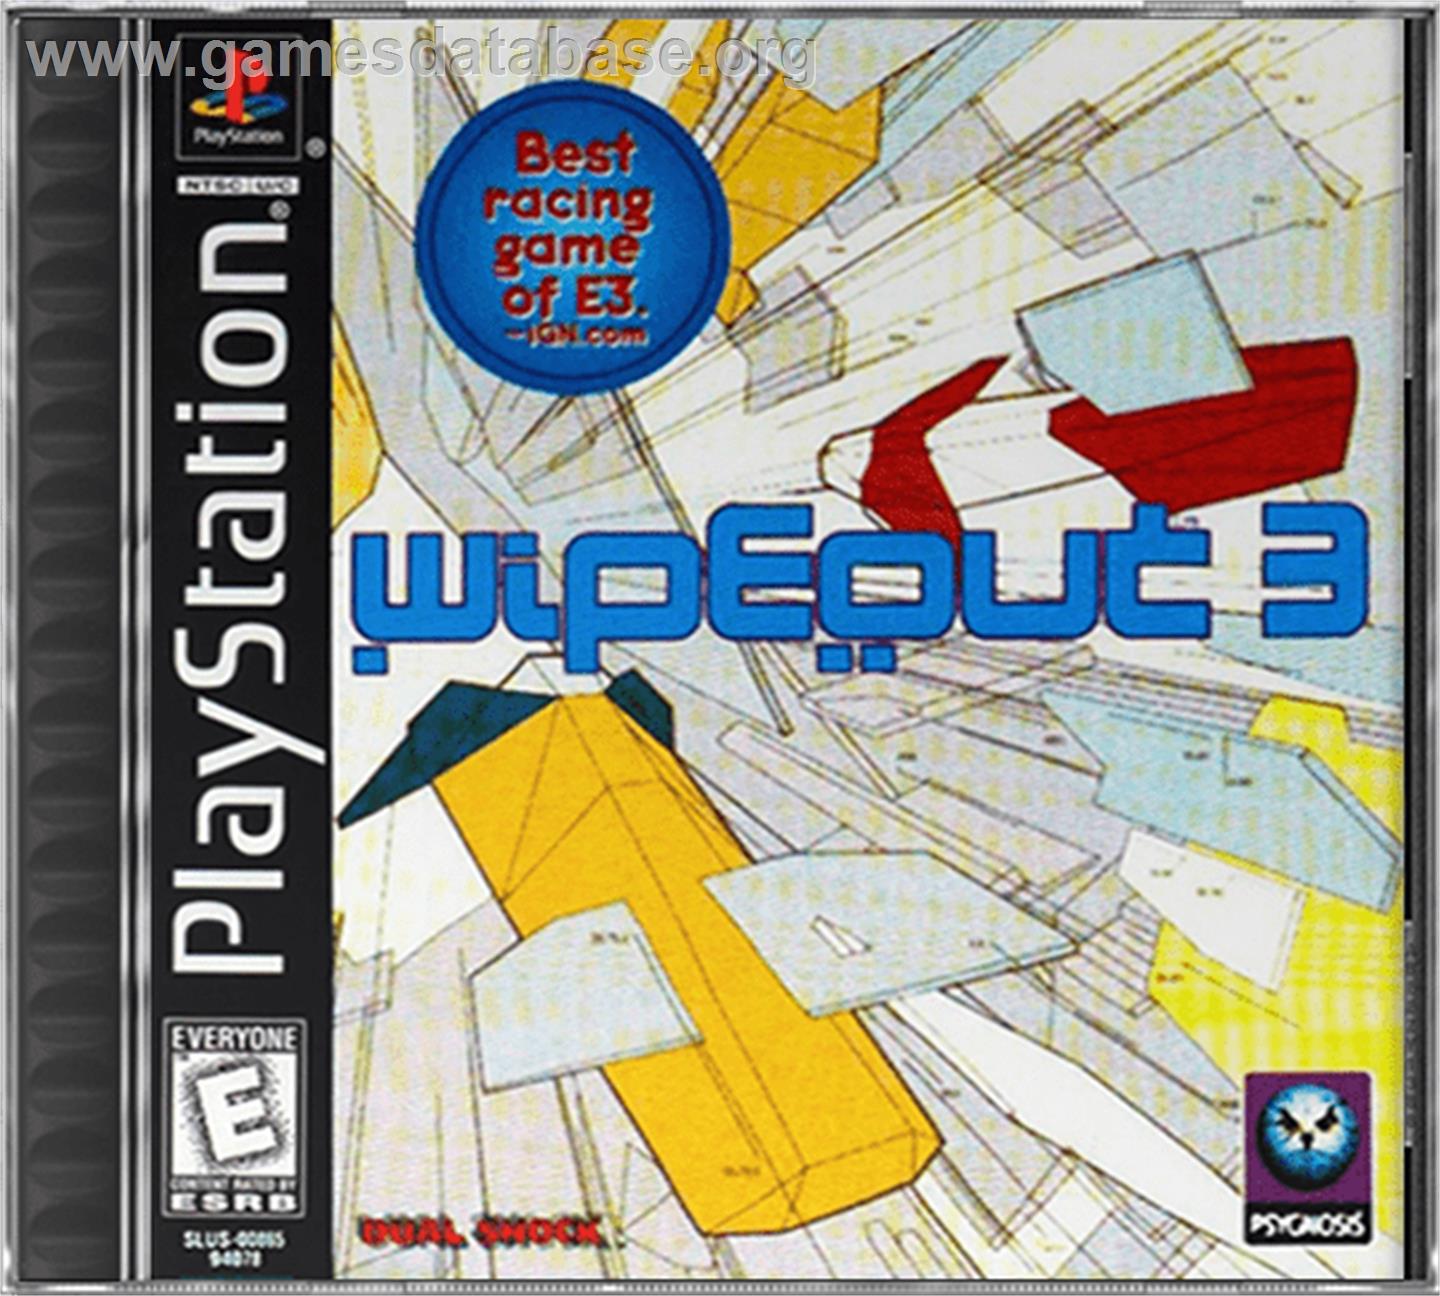 Wipeout 3: Special Edition - Sony Playstation - Artwork - Box